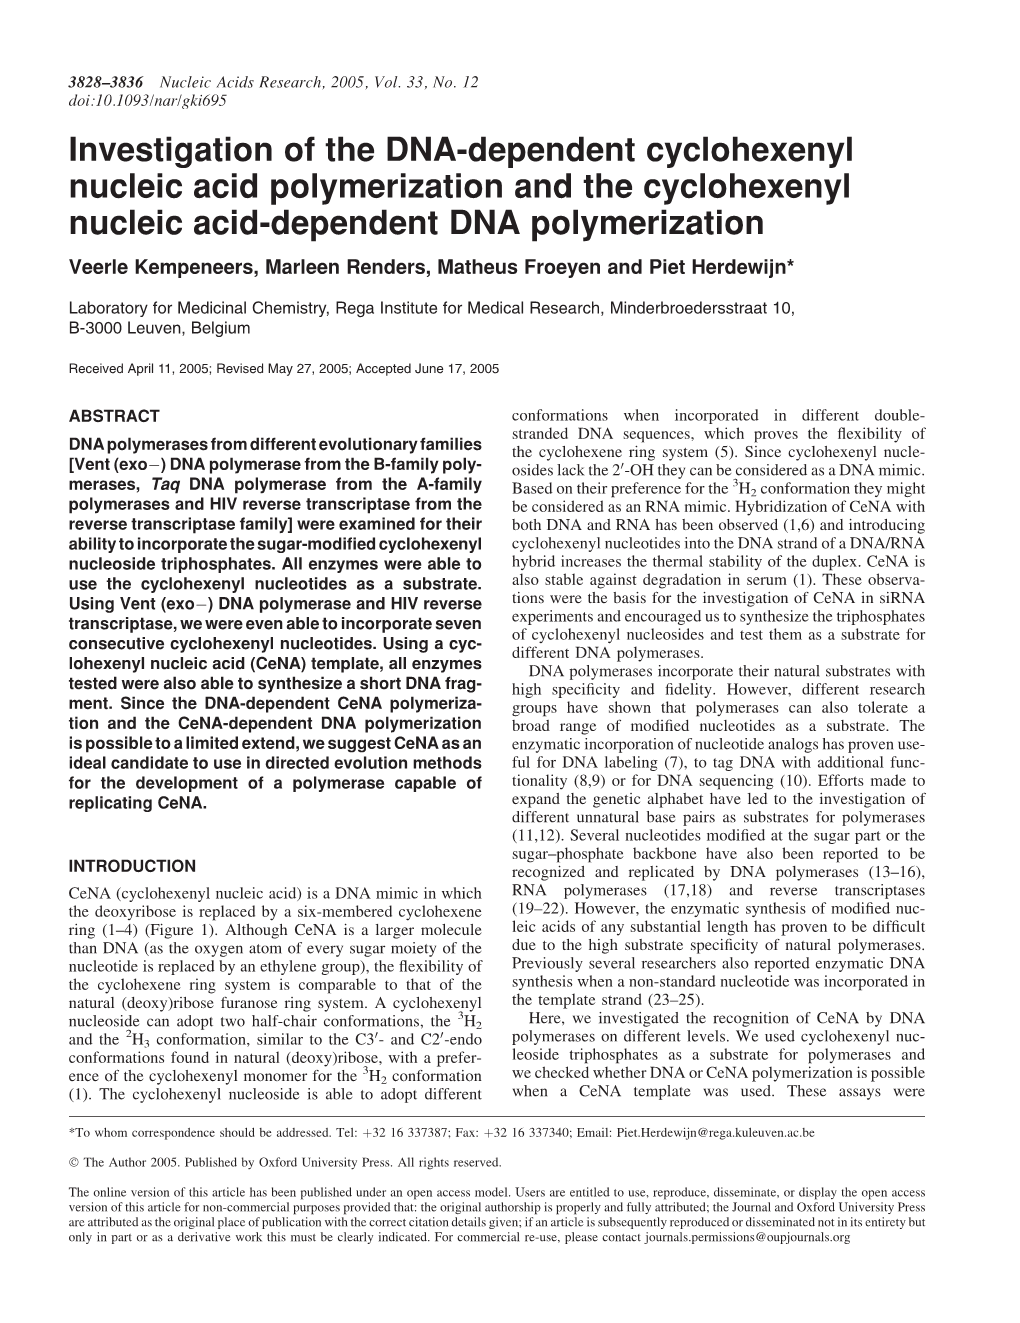 Investigation of the DNA-Dependent Cyclohexenyl Nucleic Acid